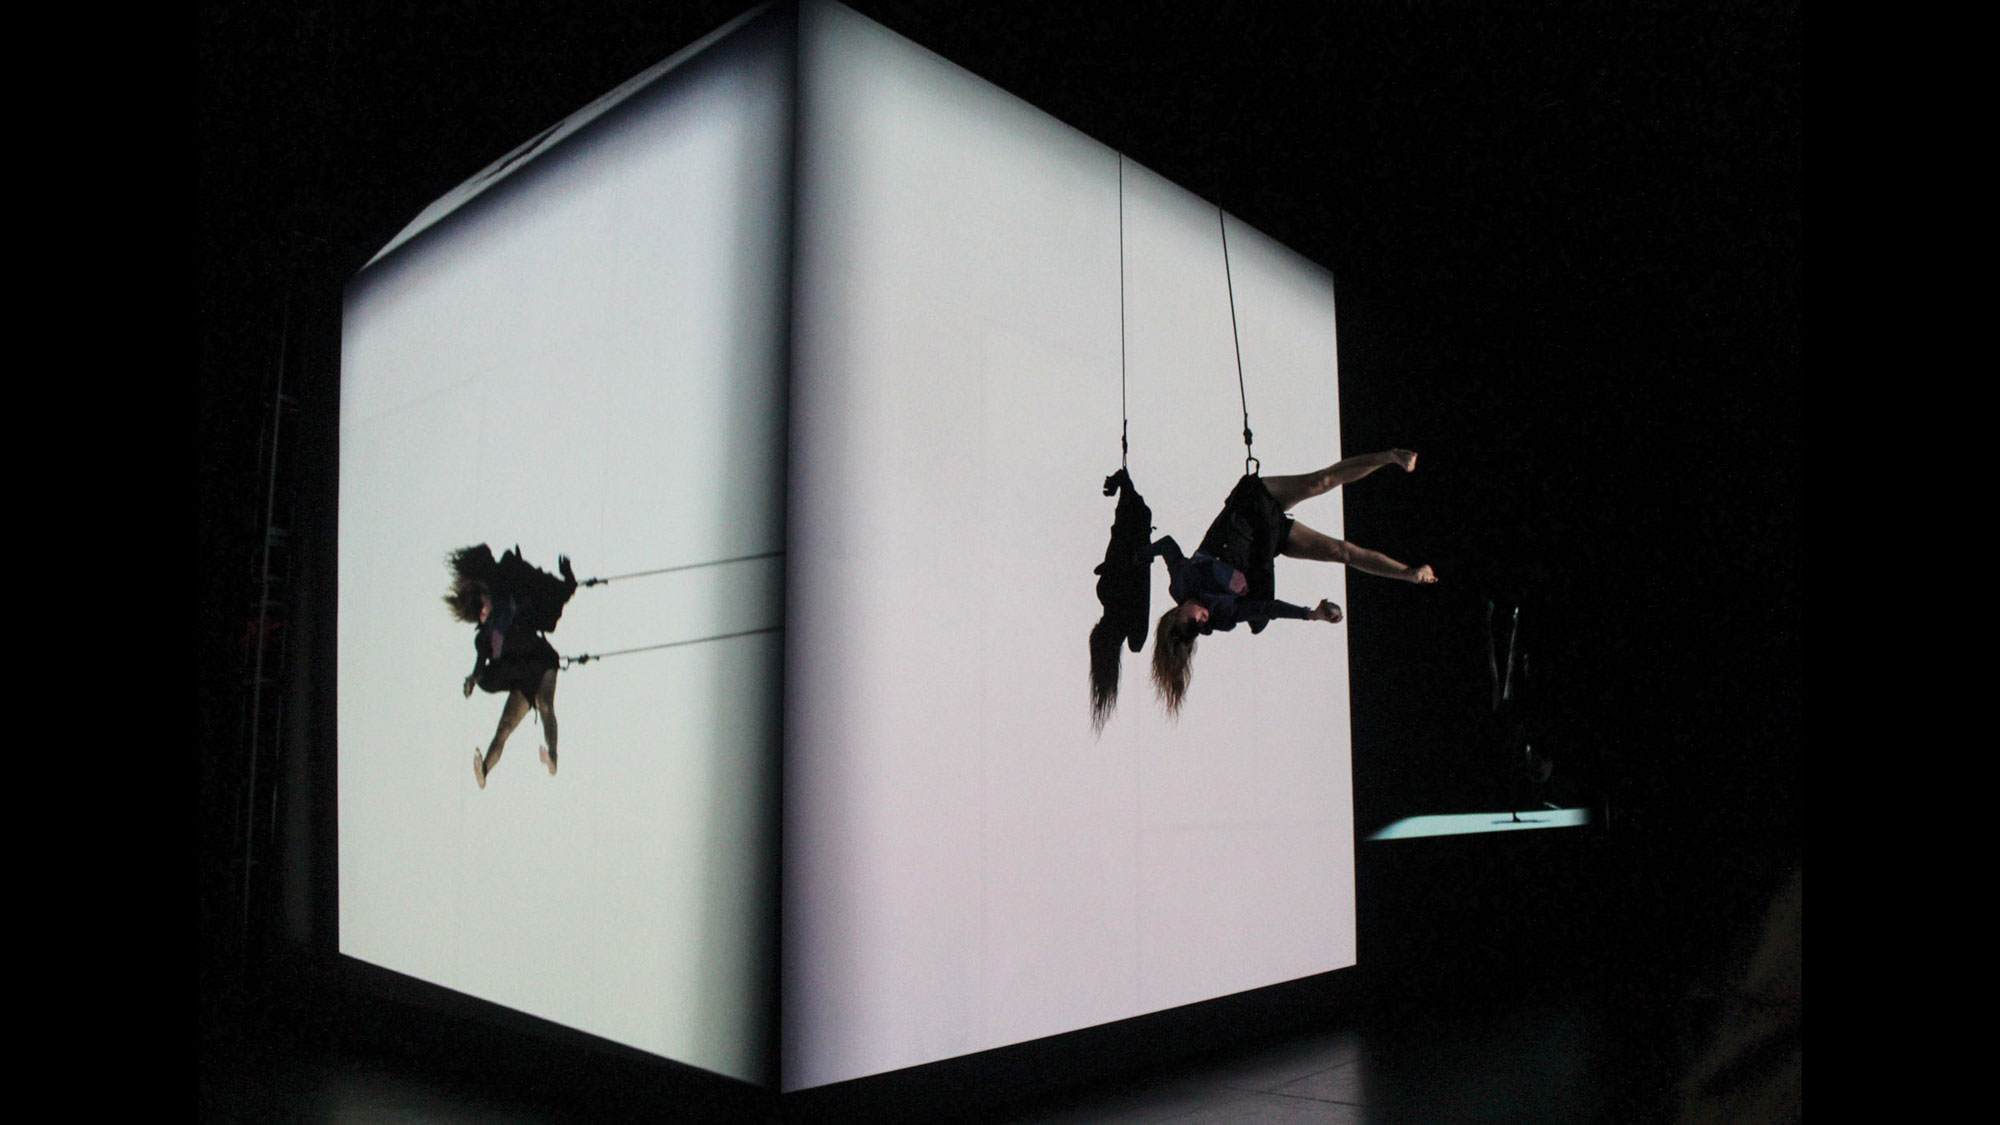 A woman suspended by a cable harness seemingly defying gravity while dancing on a white cube. 